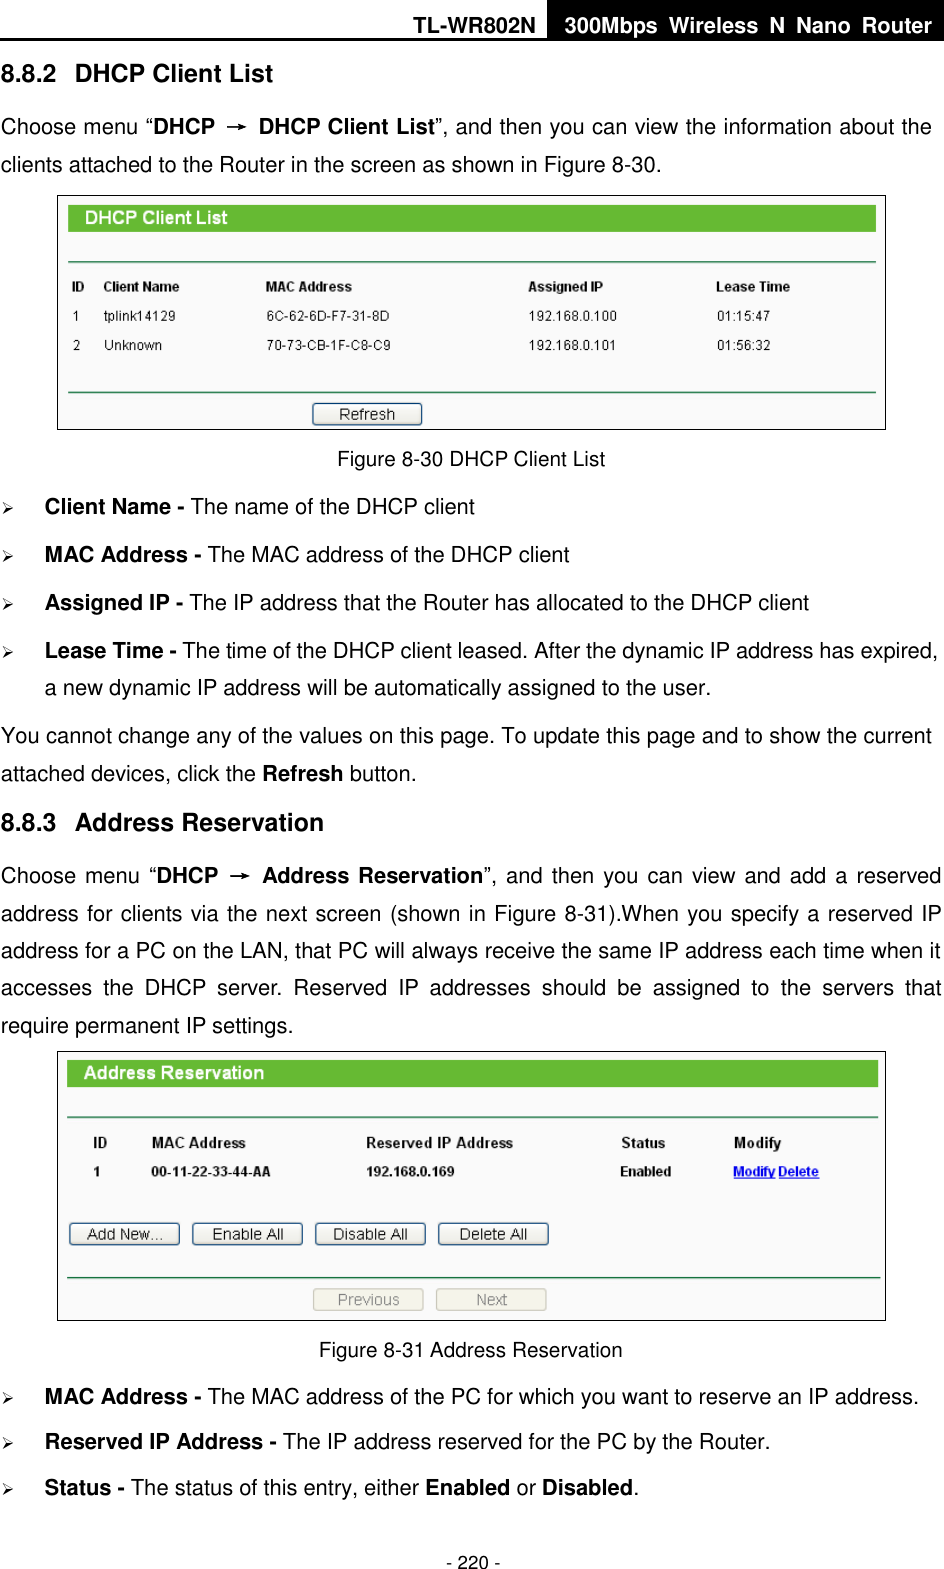 TL-WR802N 300Mbps  Wireless  N  Nano  Router  - 220 - 8.8.2  DHCP Client List Choose menu “DHCP  →  DHCP Client List”, and then you can view the information about the clients attached to the Router in the screen as shown in Figure 8-30.  Figure 8-30 DHCP Client List  Client Name - The name of the DHCP client    MAC Address - The MAC address of the DHCP client    Assigned IP - The IP address that the Router has allocated to the DHCP client  Lease Time - The time of the DHCP client leased. After the dynamic IP address has expired, a new dynamic IP address will be automatically assigned to the user.     You cannot change any of the values on this page. To update this page and to show the current attached devices, click the Refresh button. 8.8.3  Address Reservation Choose menu “DHCP  →  Address Reservation”, and then you can view and add a reserved address for clients via the next screen (shown in Figure 8-31).When you specify a reserved IP address for a PC on the LAN, that PC will always receive the same IP address each time when it accesses  the  DHCP  server.  Reserved  IP  addresses  should  be  assigned  to  the  servers  that require permanent IP settings.    Figure 8-31 Address Reservation  MAC Address - The MAC address of the PC for which you want to reserve an IP address.  Reserved IP Address - The IP address reserved for the PC by the Router.  Status - The status of this entry, either Enabled or Disabled. 